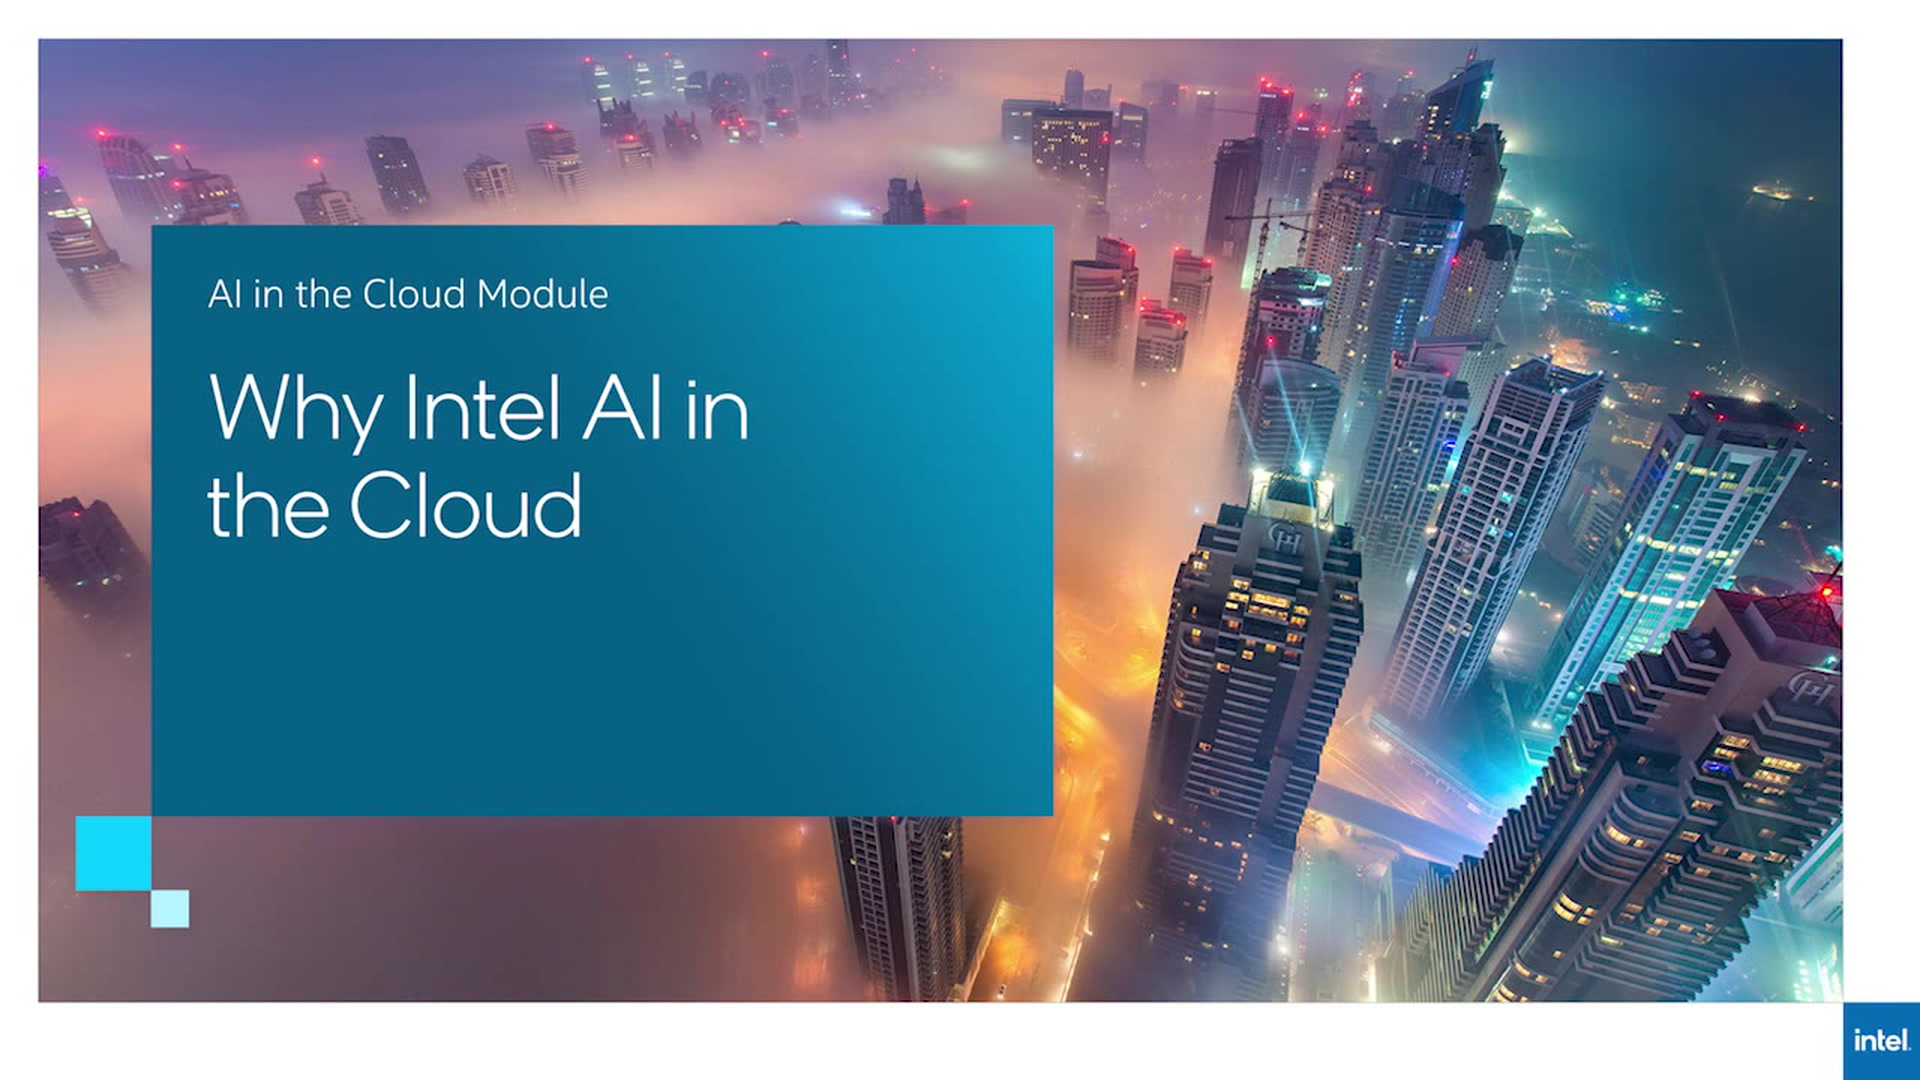 Chapter 1: Why Intel AI in the Cloud